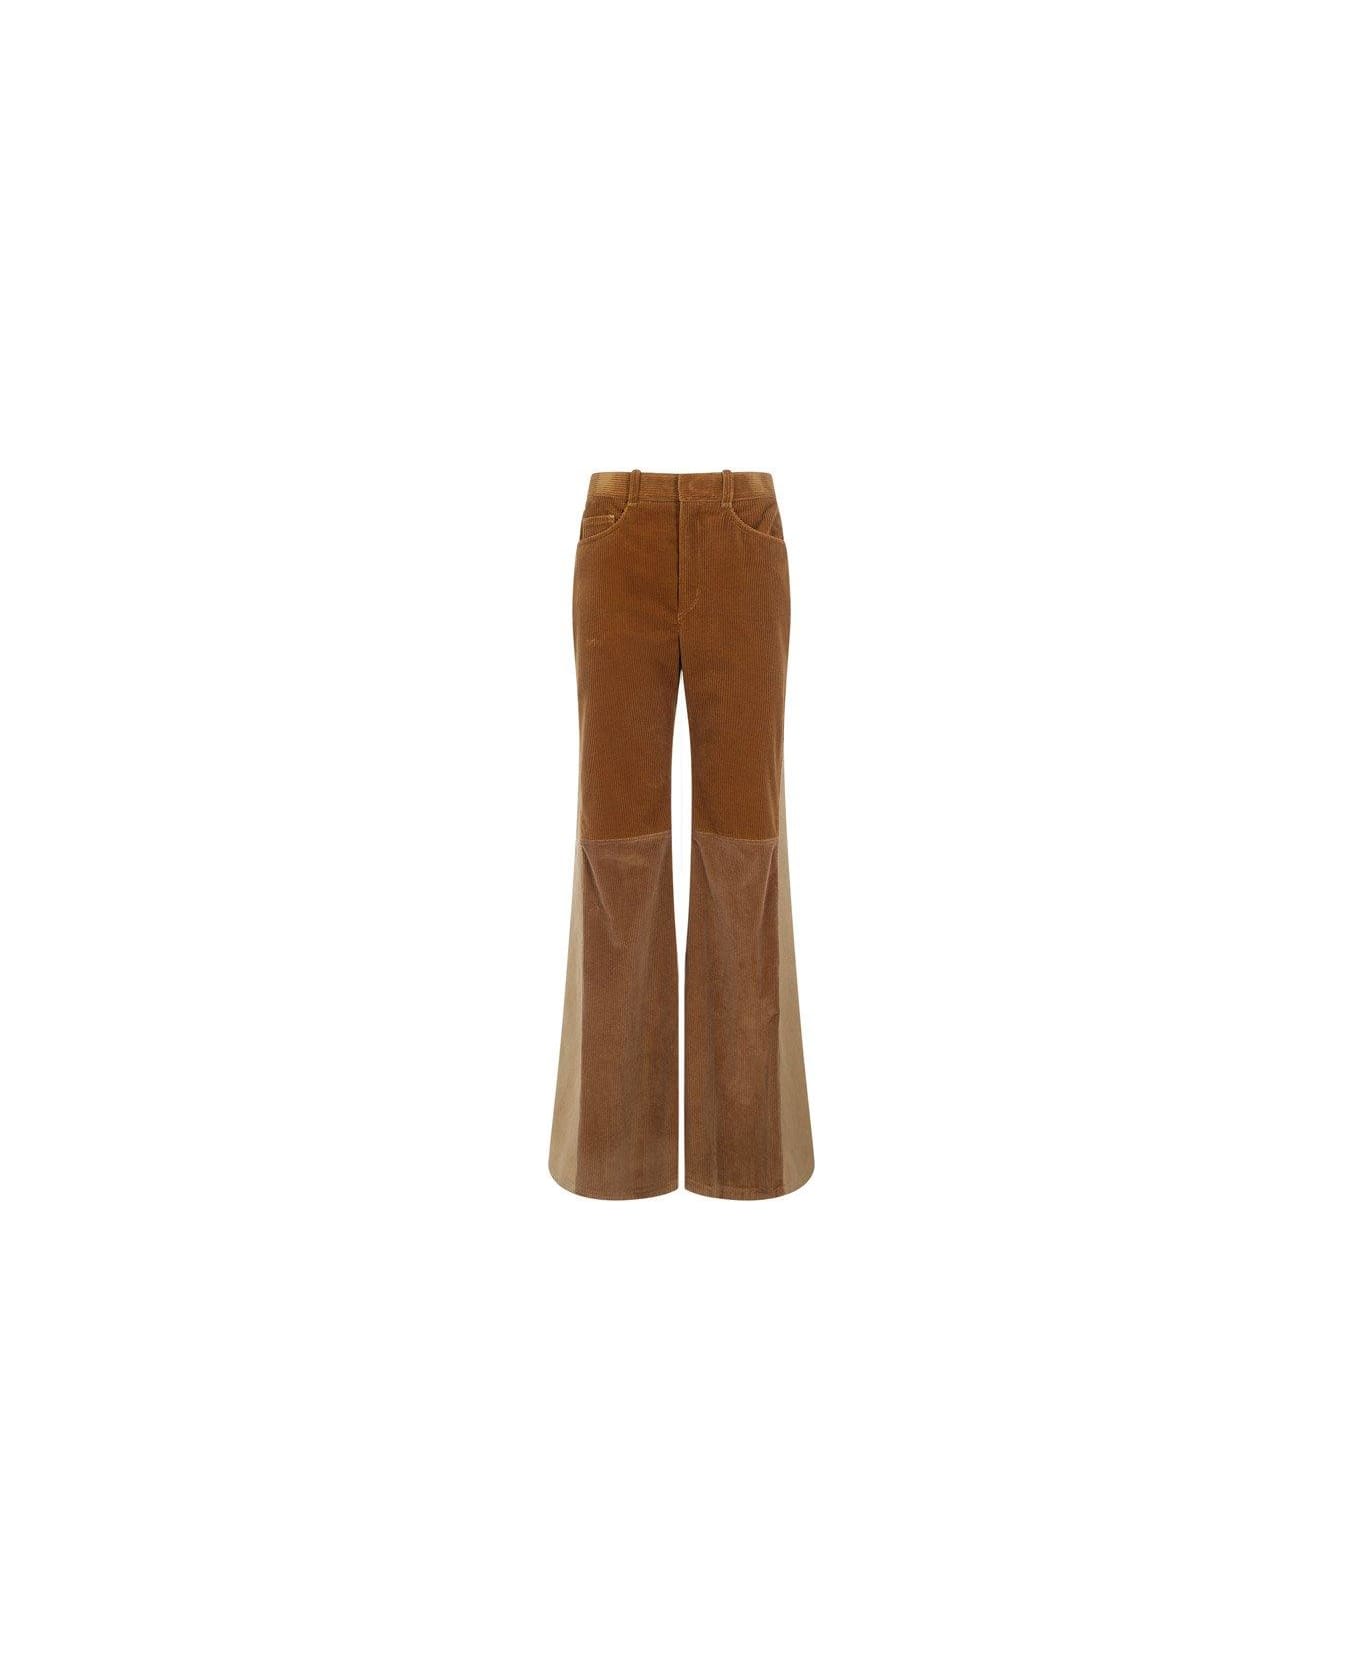 Chloé Patchwork Flared Trousers - Brown ボトムス